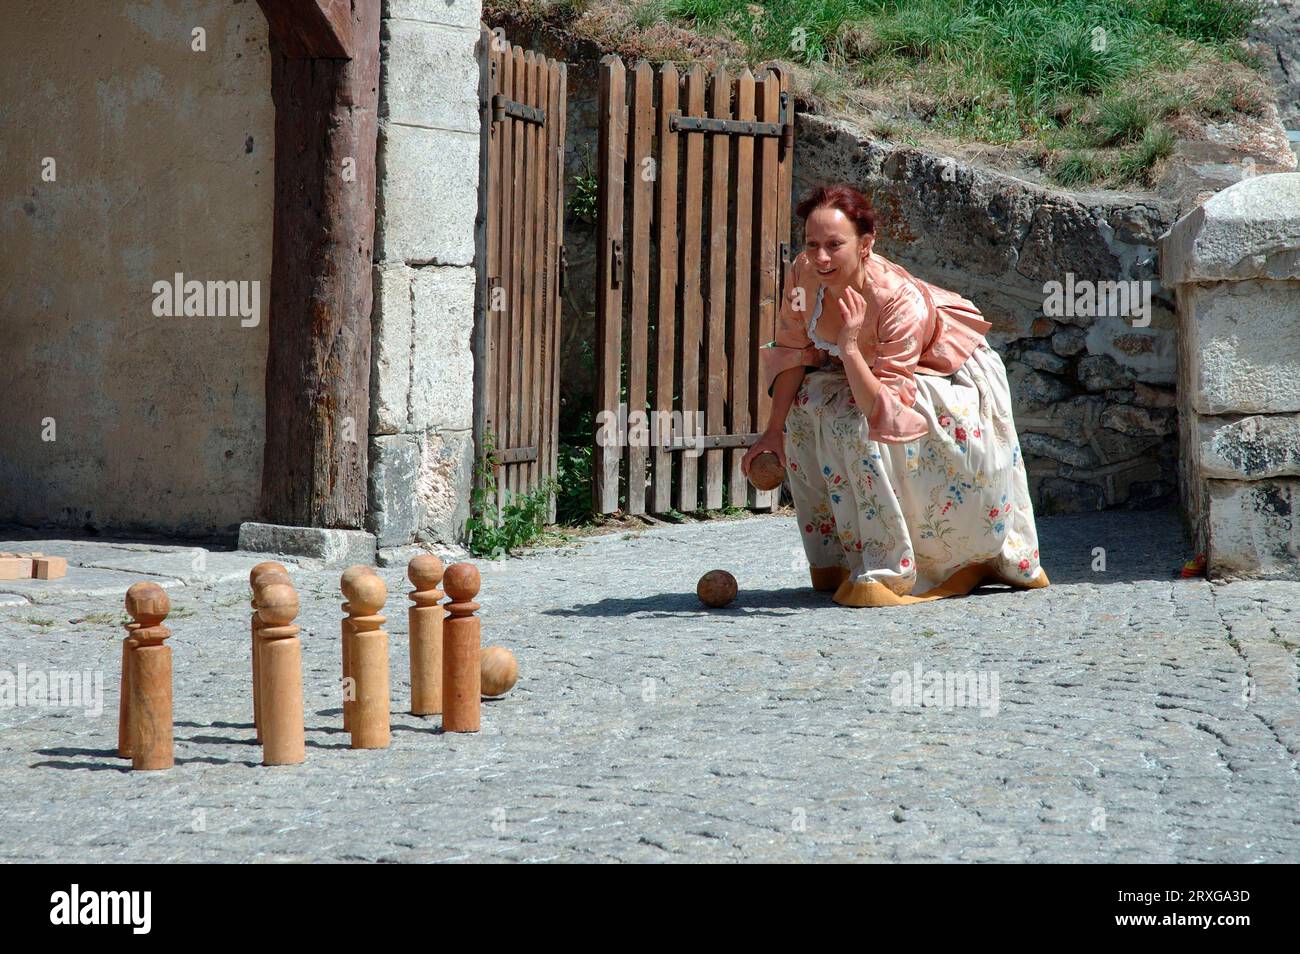 Woman in traditional traditional costume playing skittles, Briancon, France Stock Photo